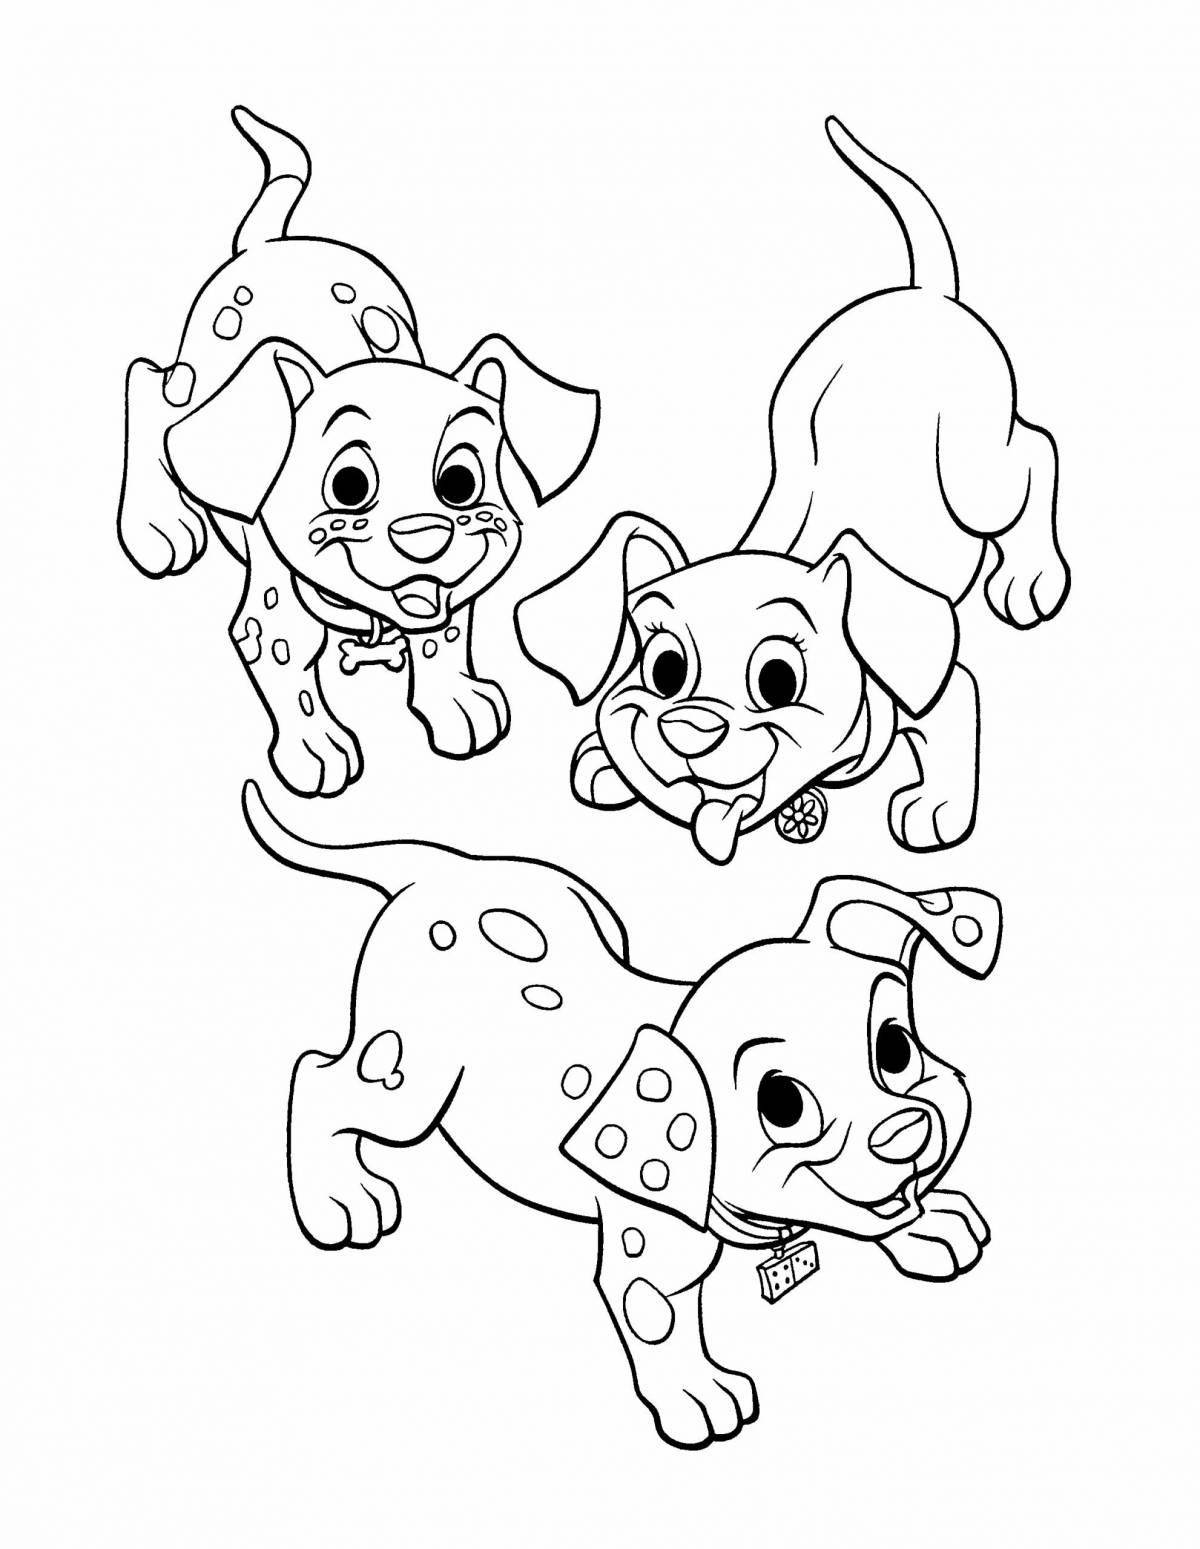 Fluffy coloring pages kittens with dogs for children 3 4 years old